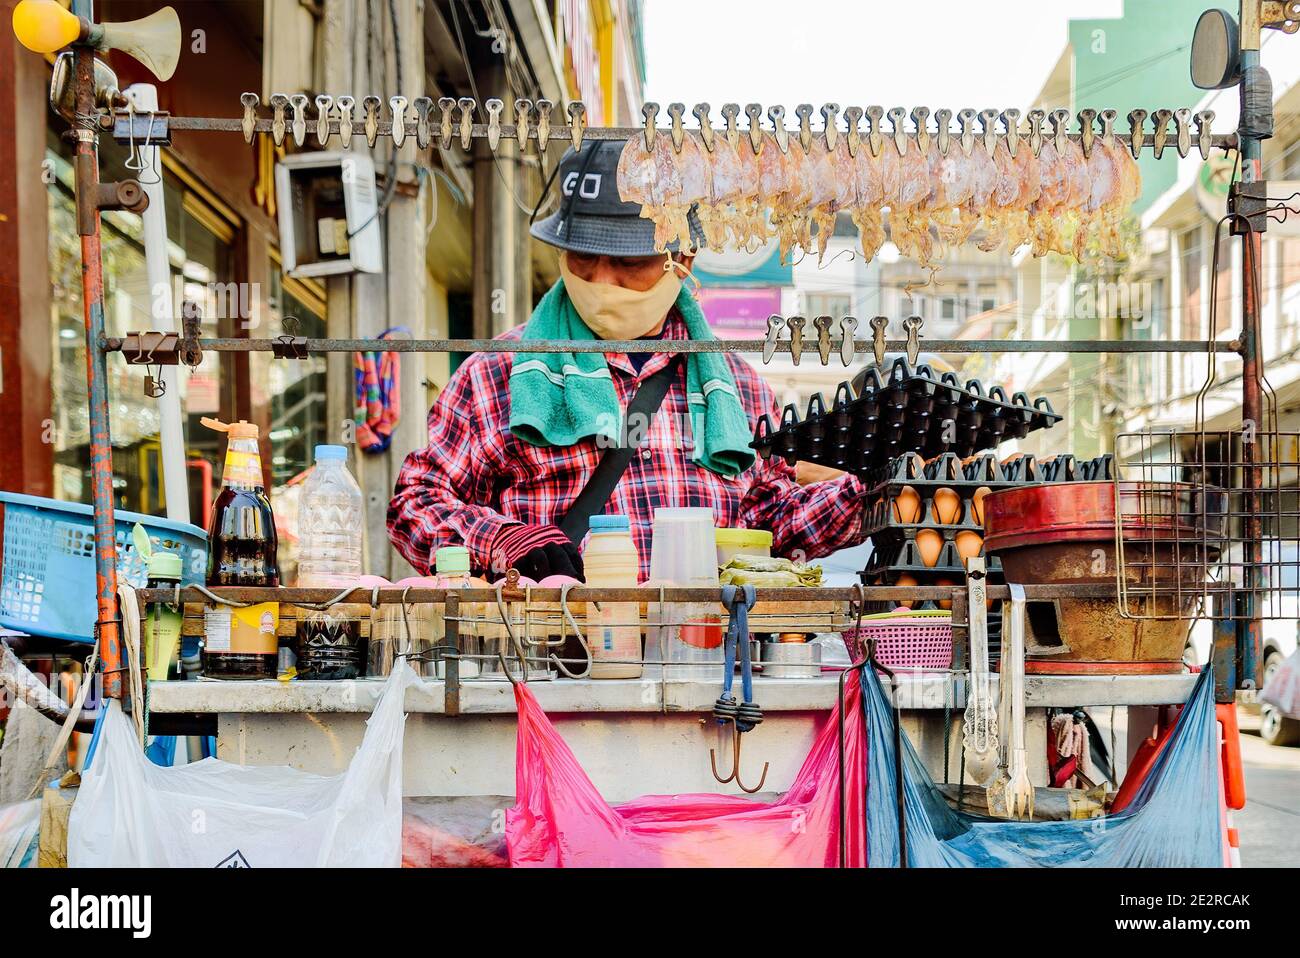 China Town, Bangkok, Thailand - Nov. 14, 2020: A street food seller must always wear a protective face mask while selling his food. Stock Photo